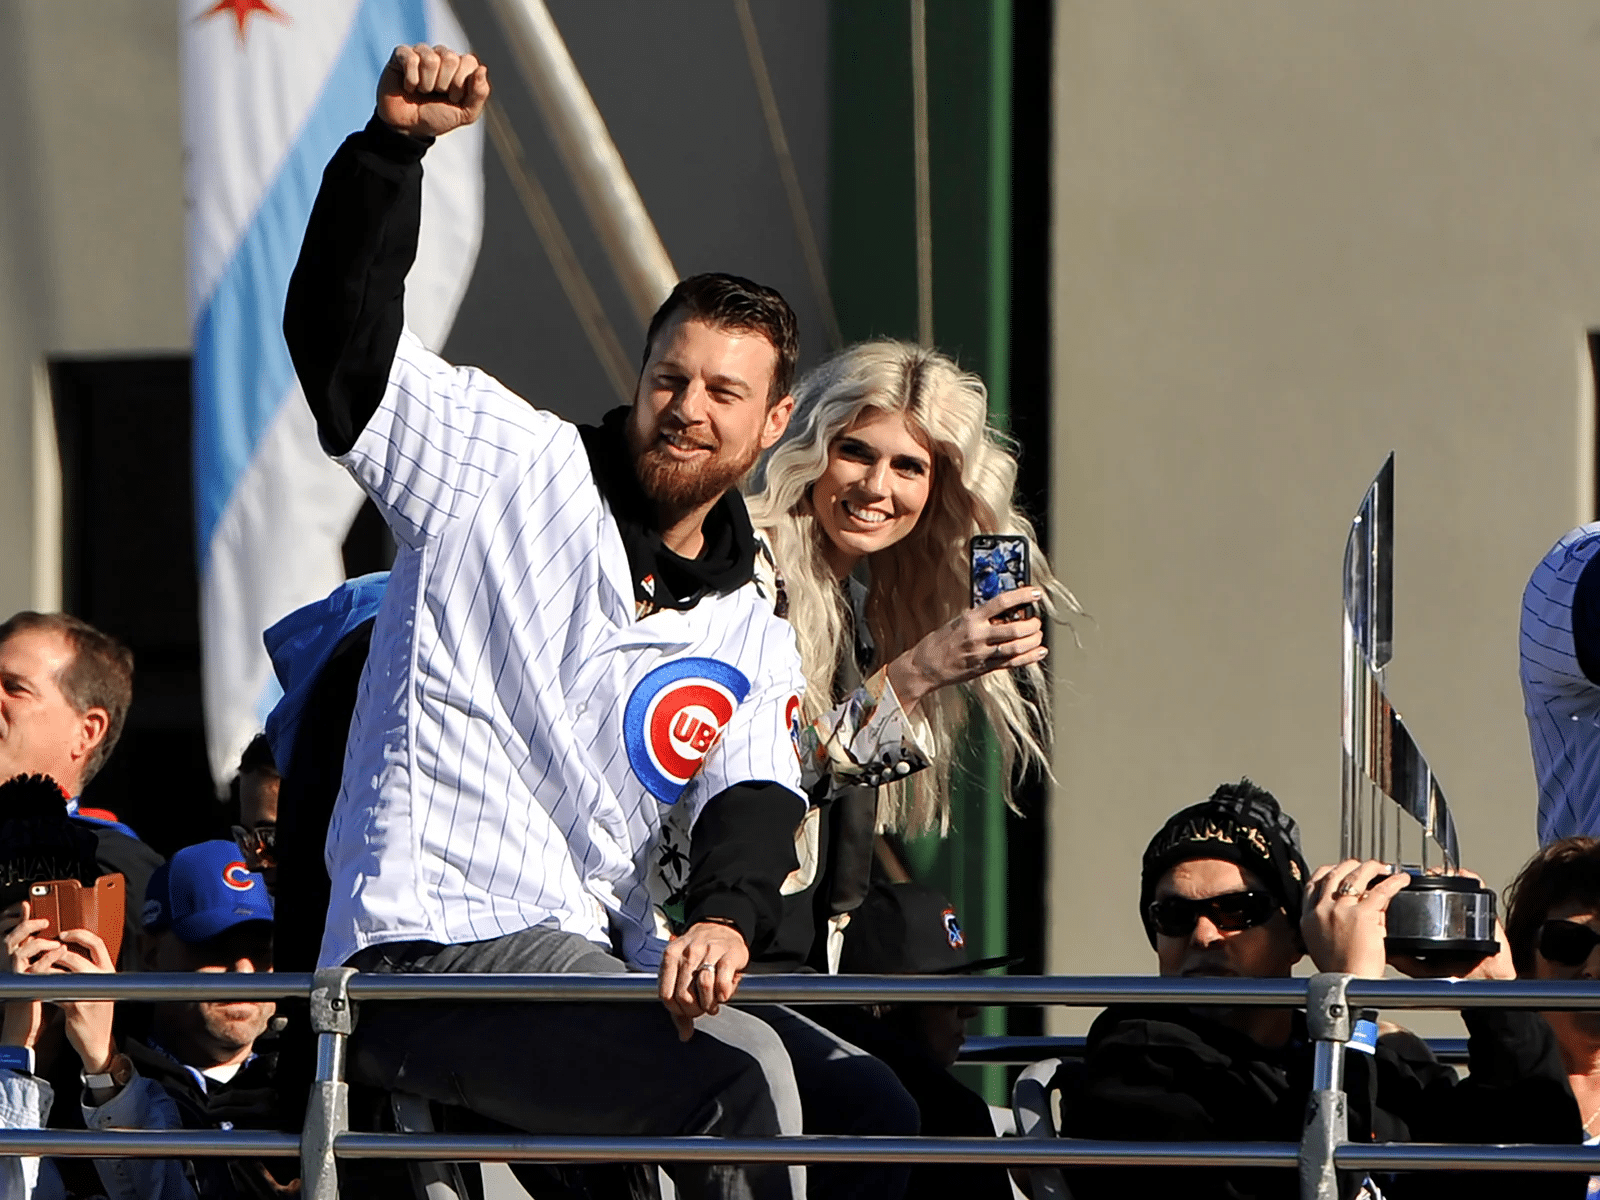 Julianna Zobrist responds to affair claims about pastor Byron Yawn